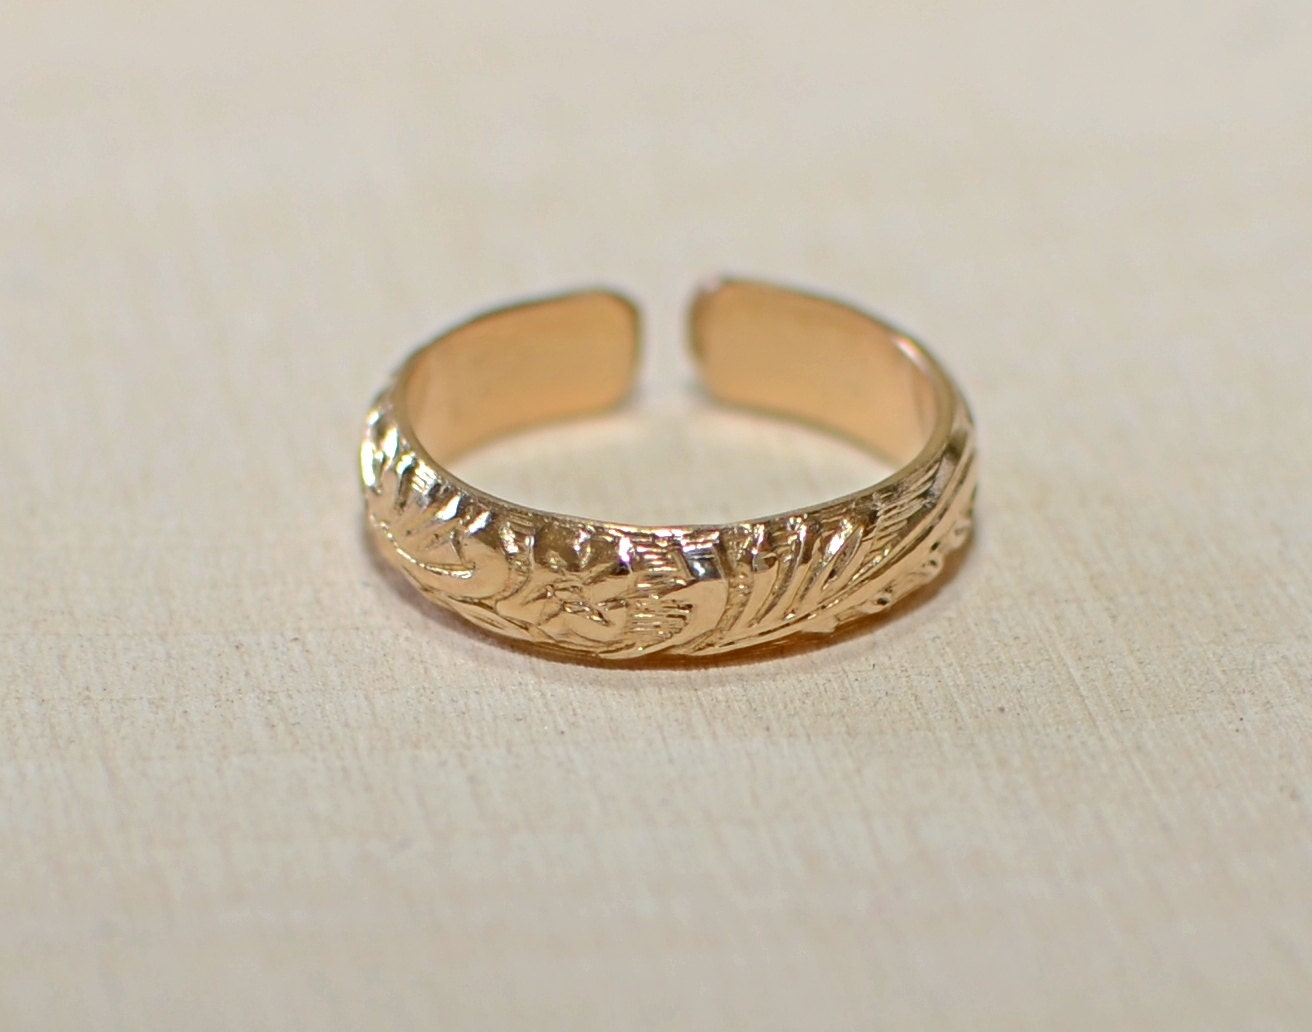 Yellow 14k gold toe ring with patterned leaf design